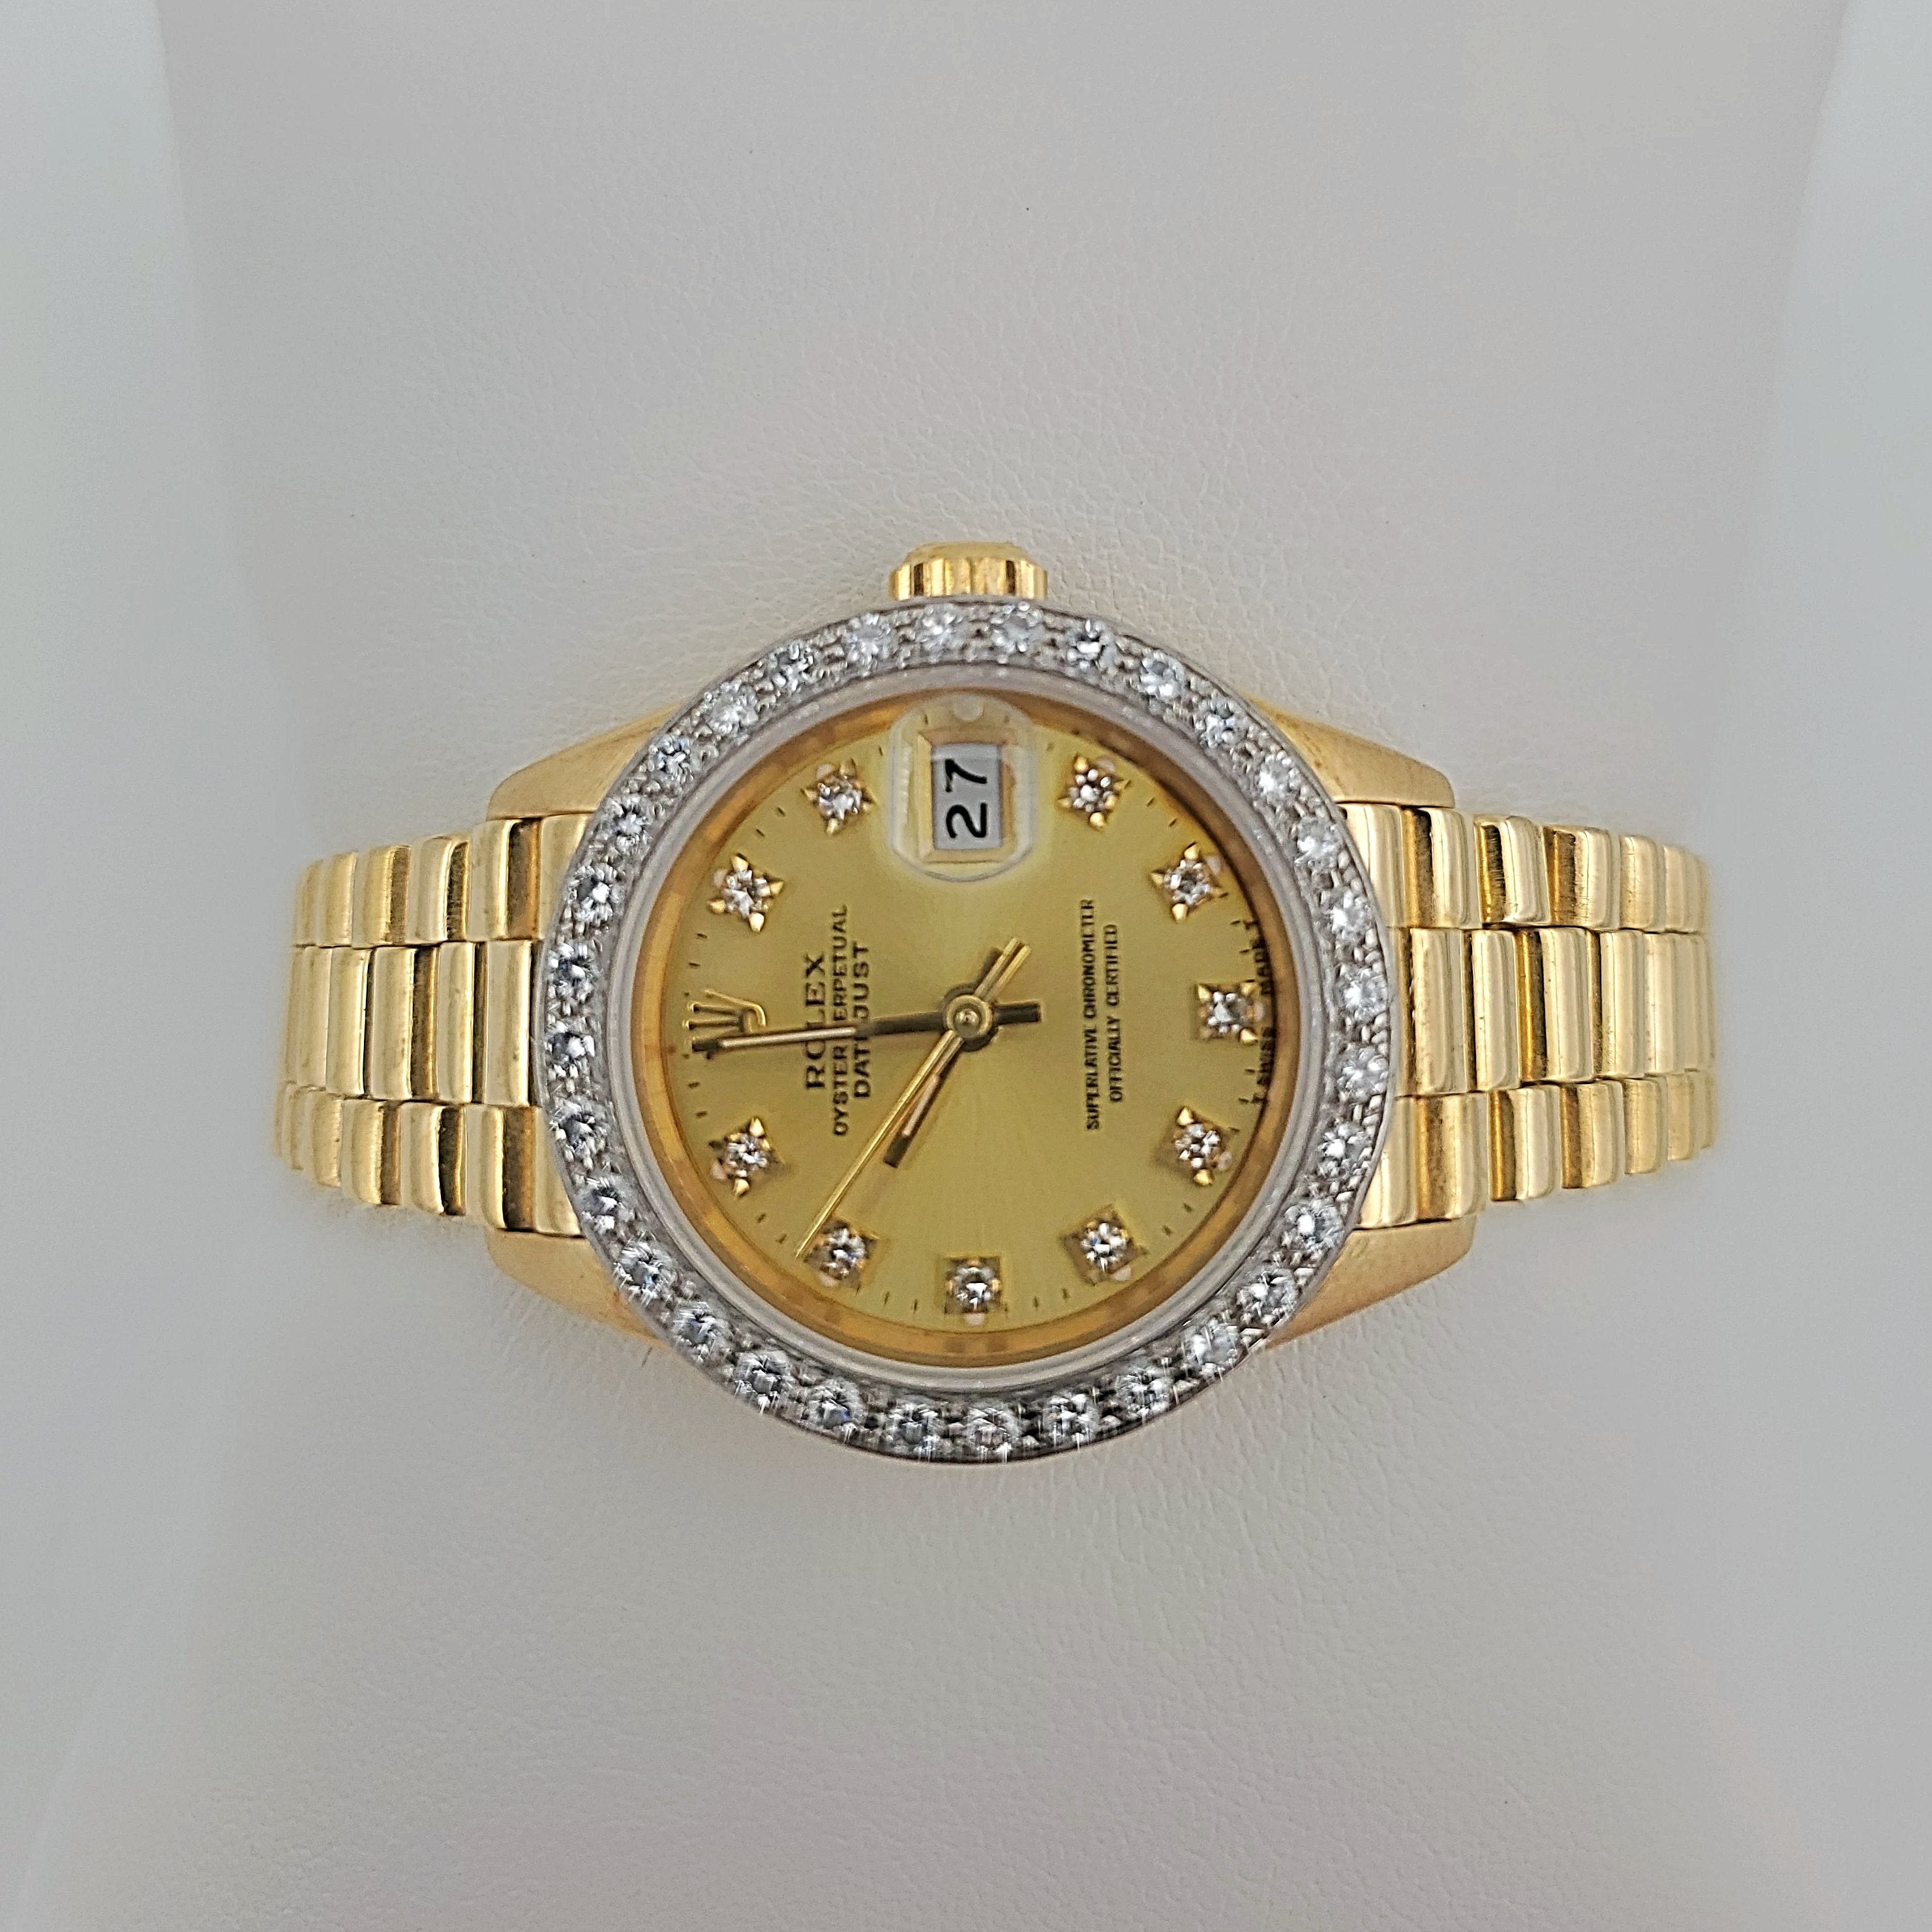 Ladies Rolex 26mm Presidential 18K Yellow Gold Watch with Champagne Diamond Dial and Diamond Bezel. (Pre-Owned)